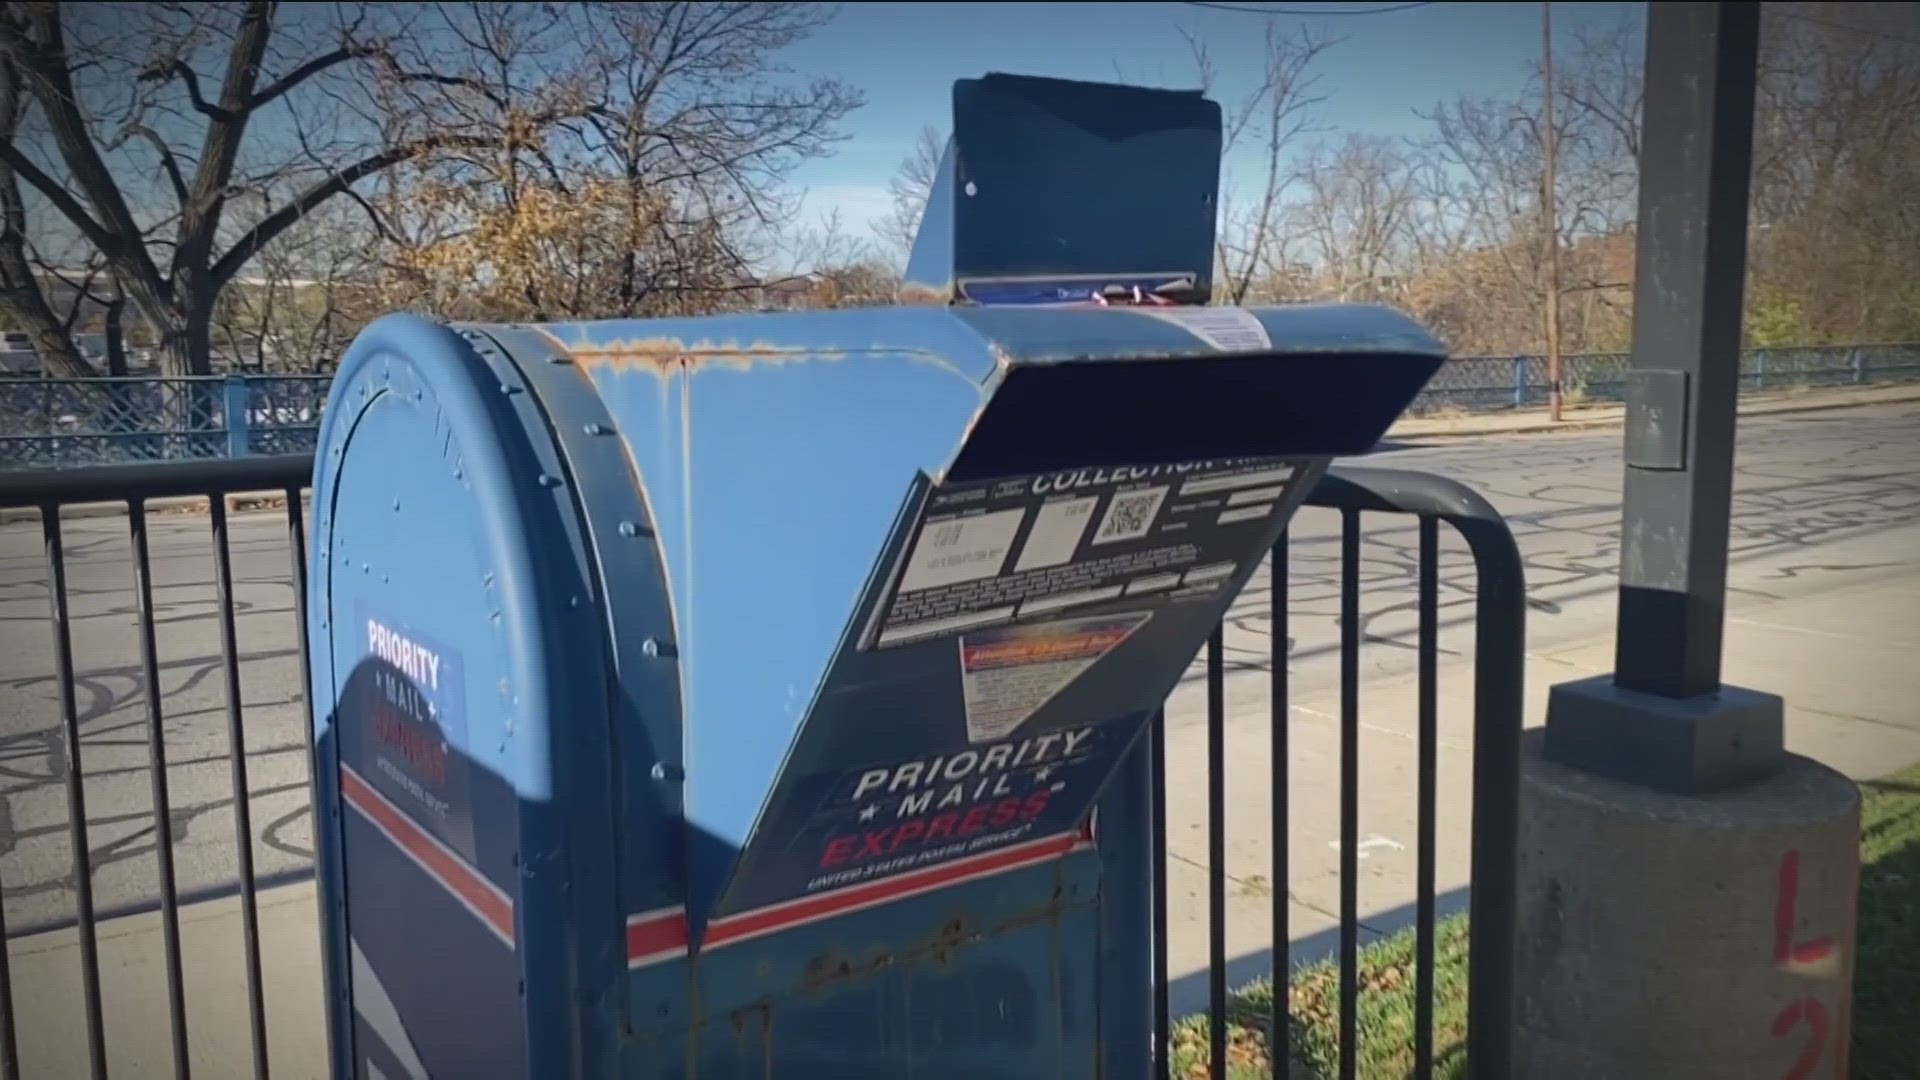 USPS admits it is allowing customers to deposit mail in boxes that have been compromised, but says they don't want to 'tip off' thieves.